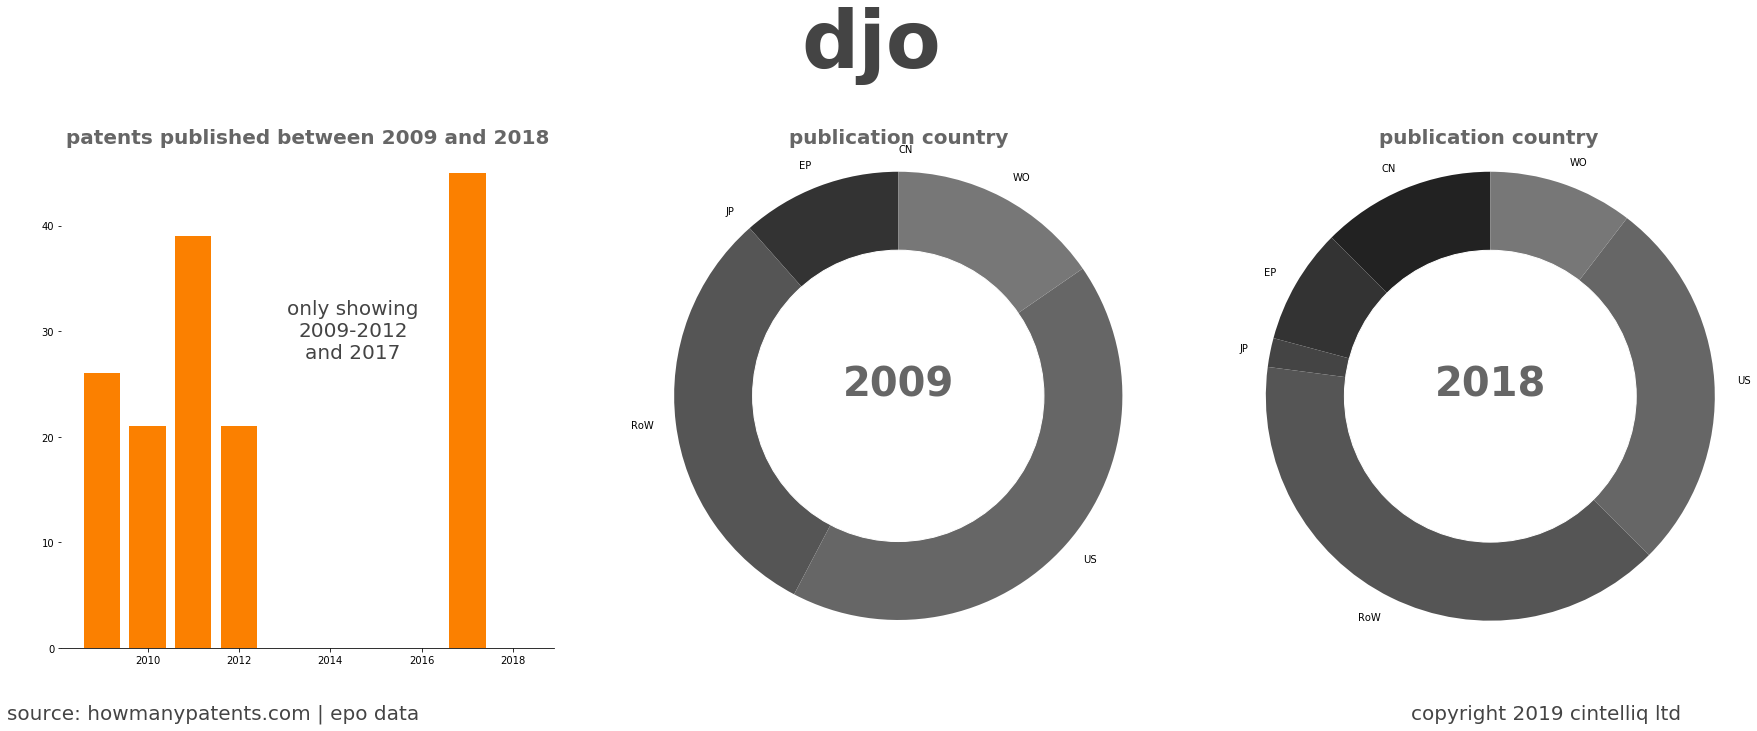 summary of patents for Djo